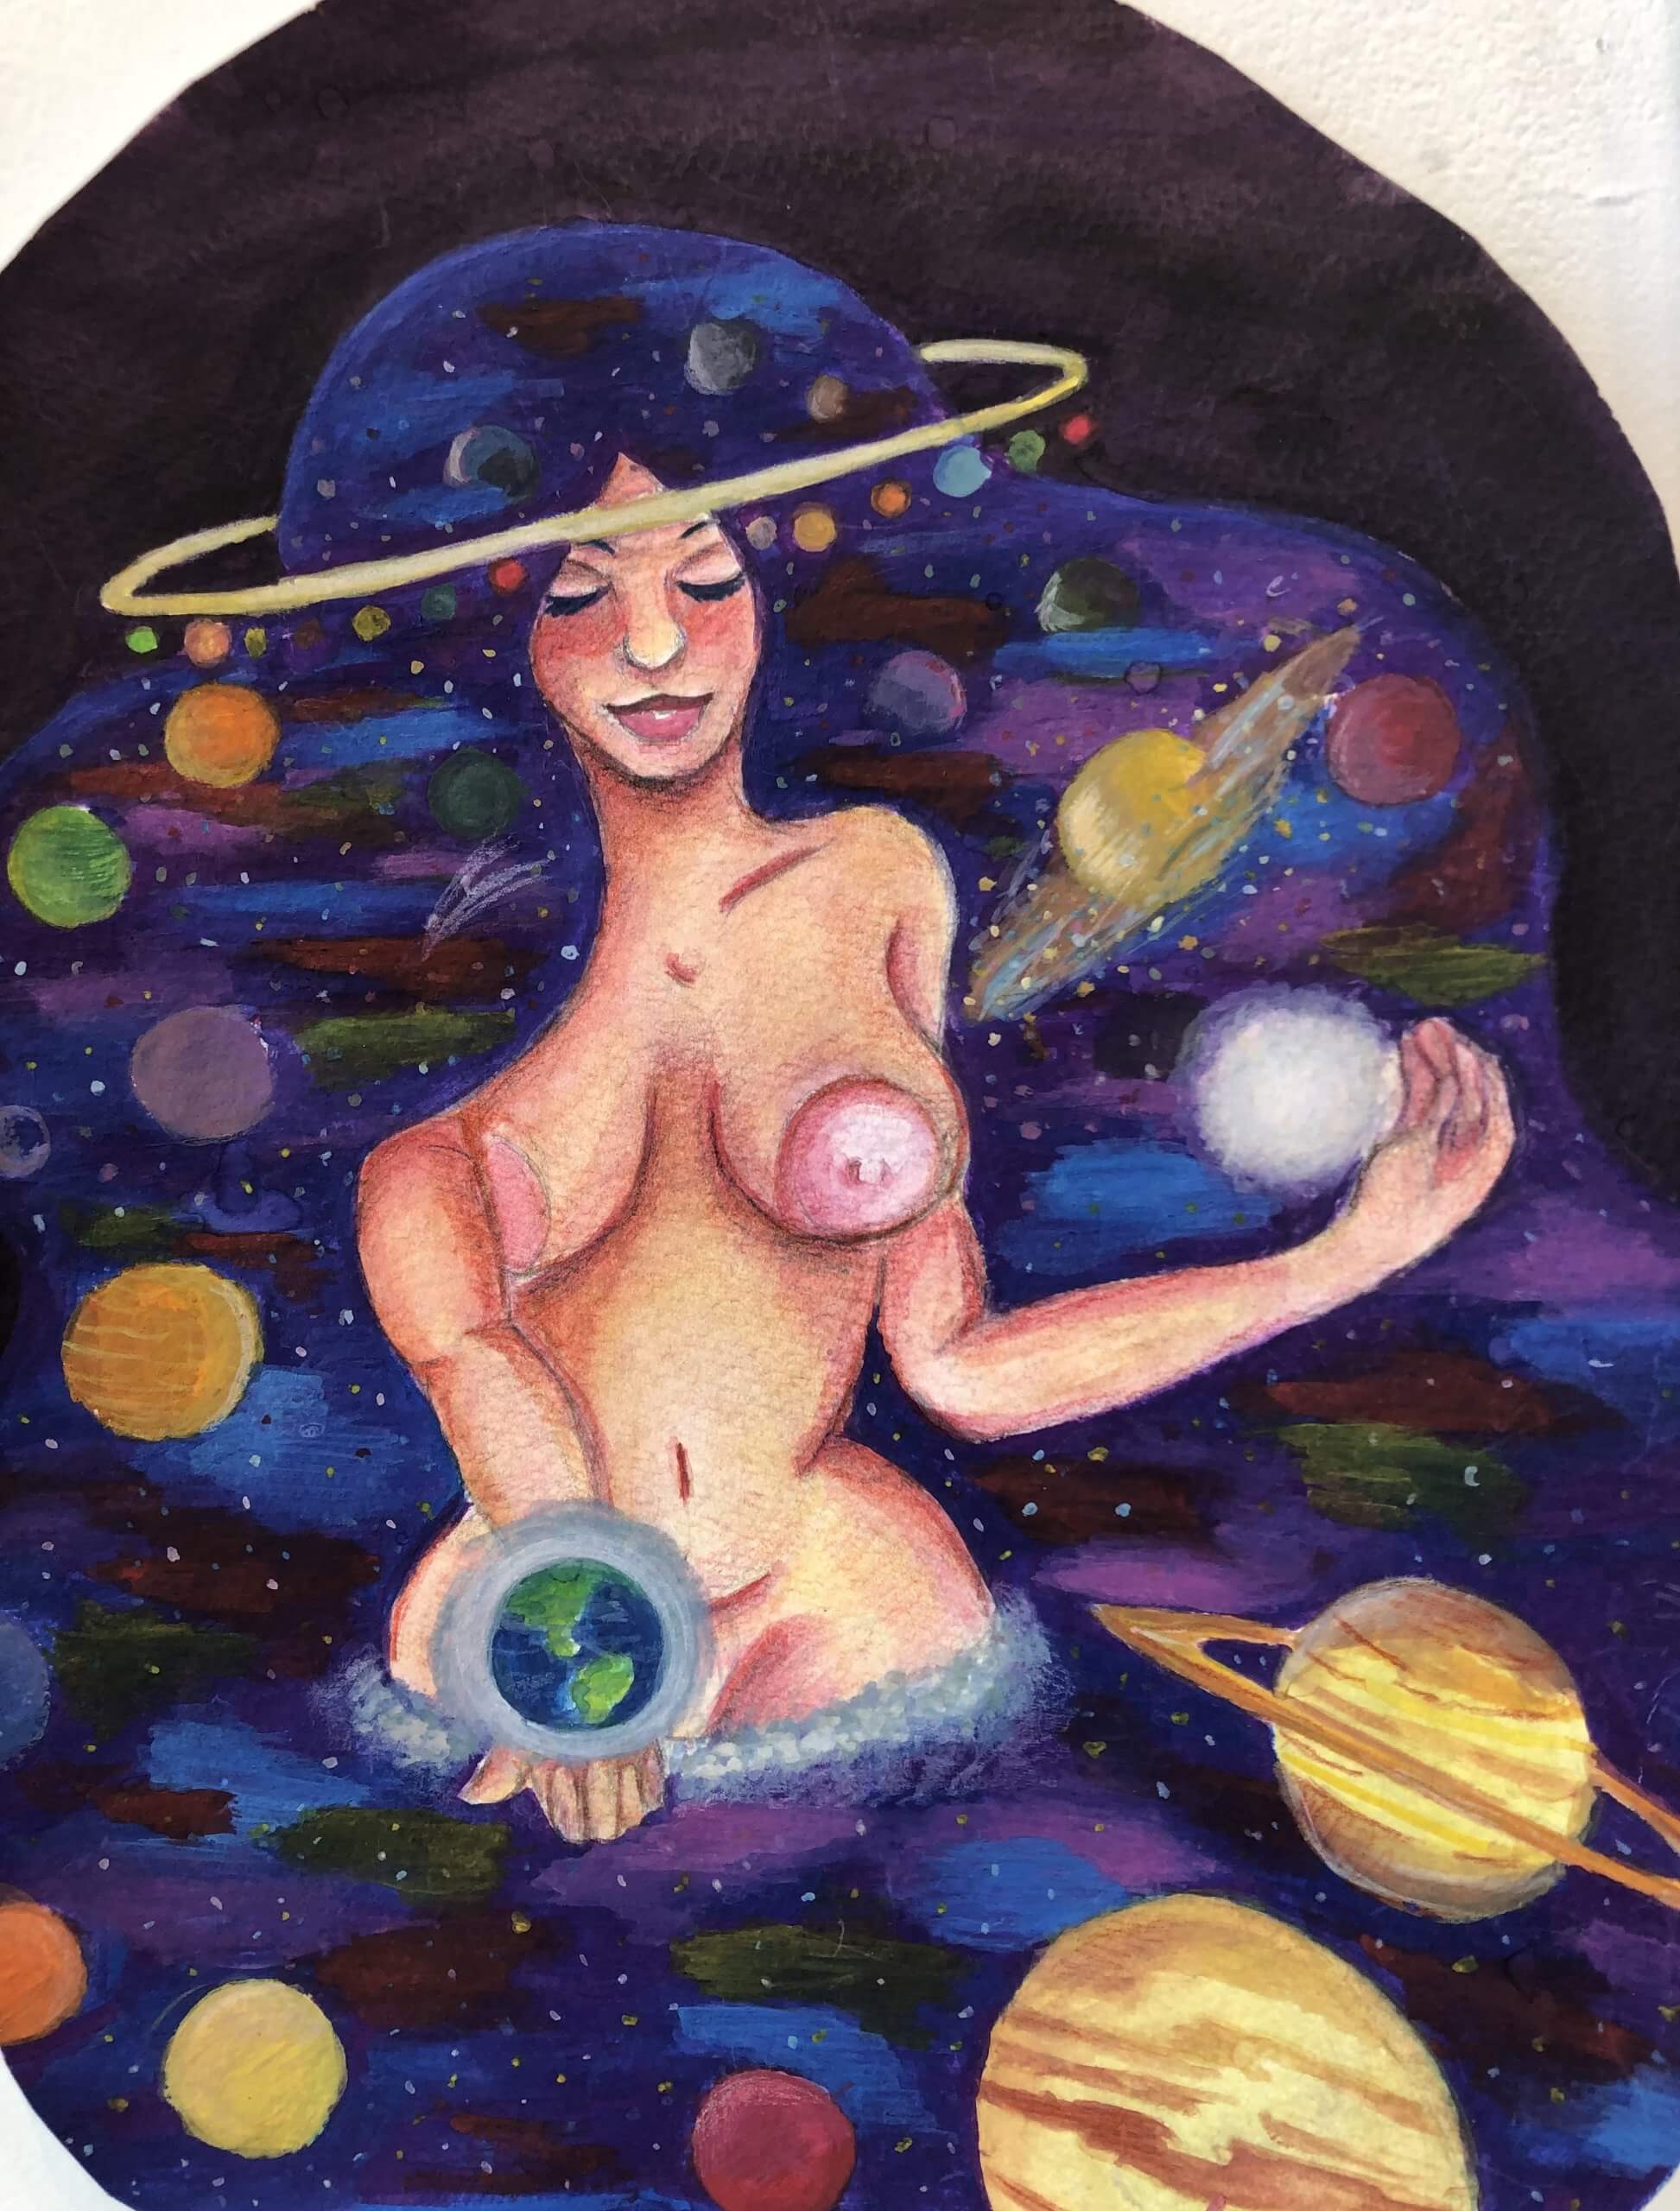 Makayla Richardson, "Mother Nature: Creation" Gouache And Colored Pencil, 14" x 10.5"